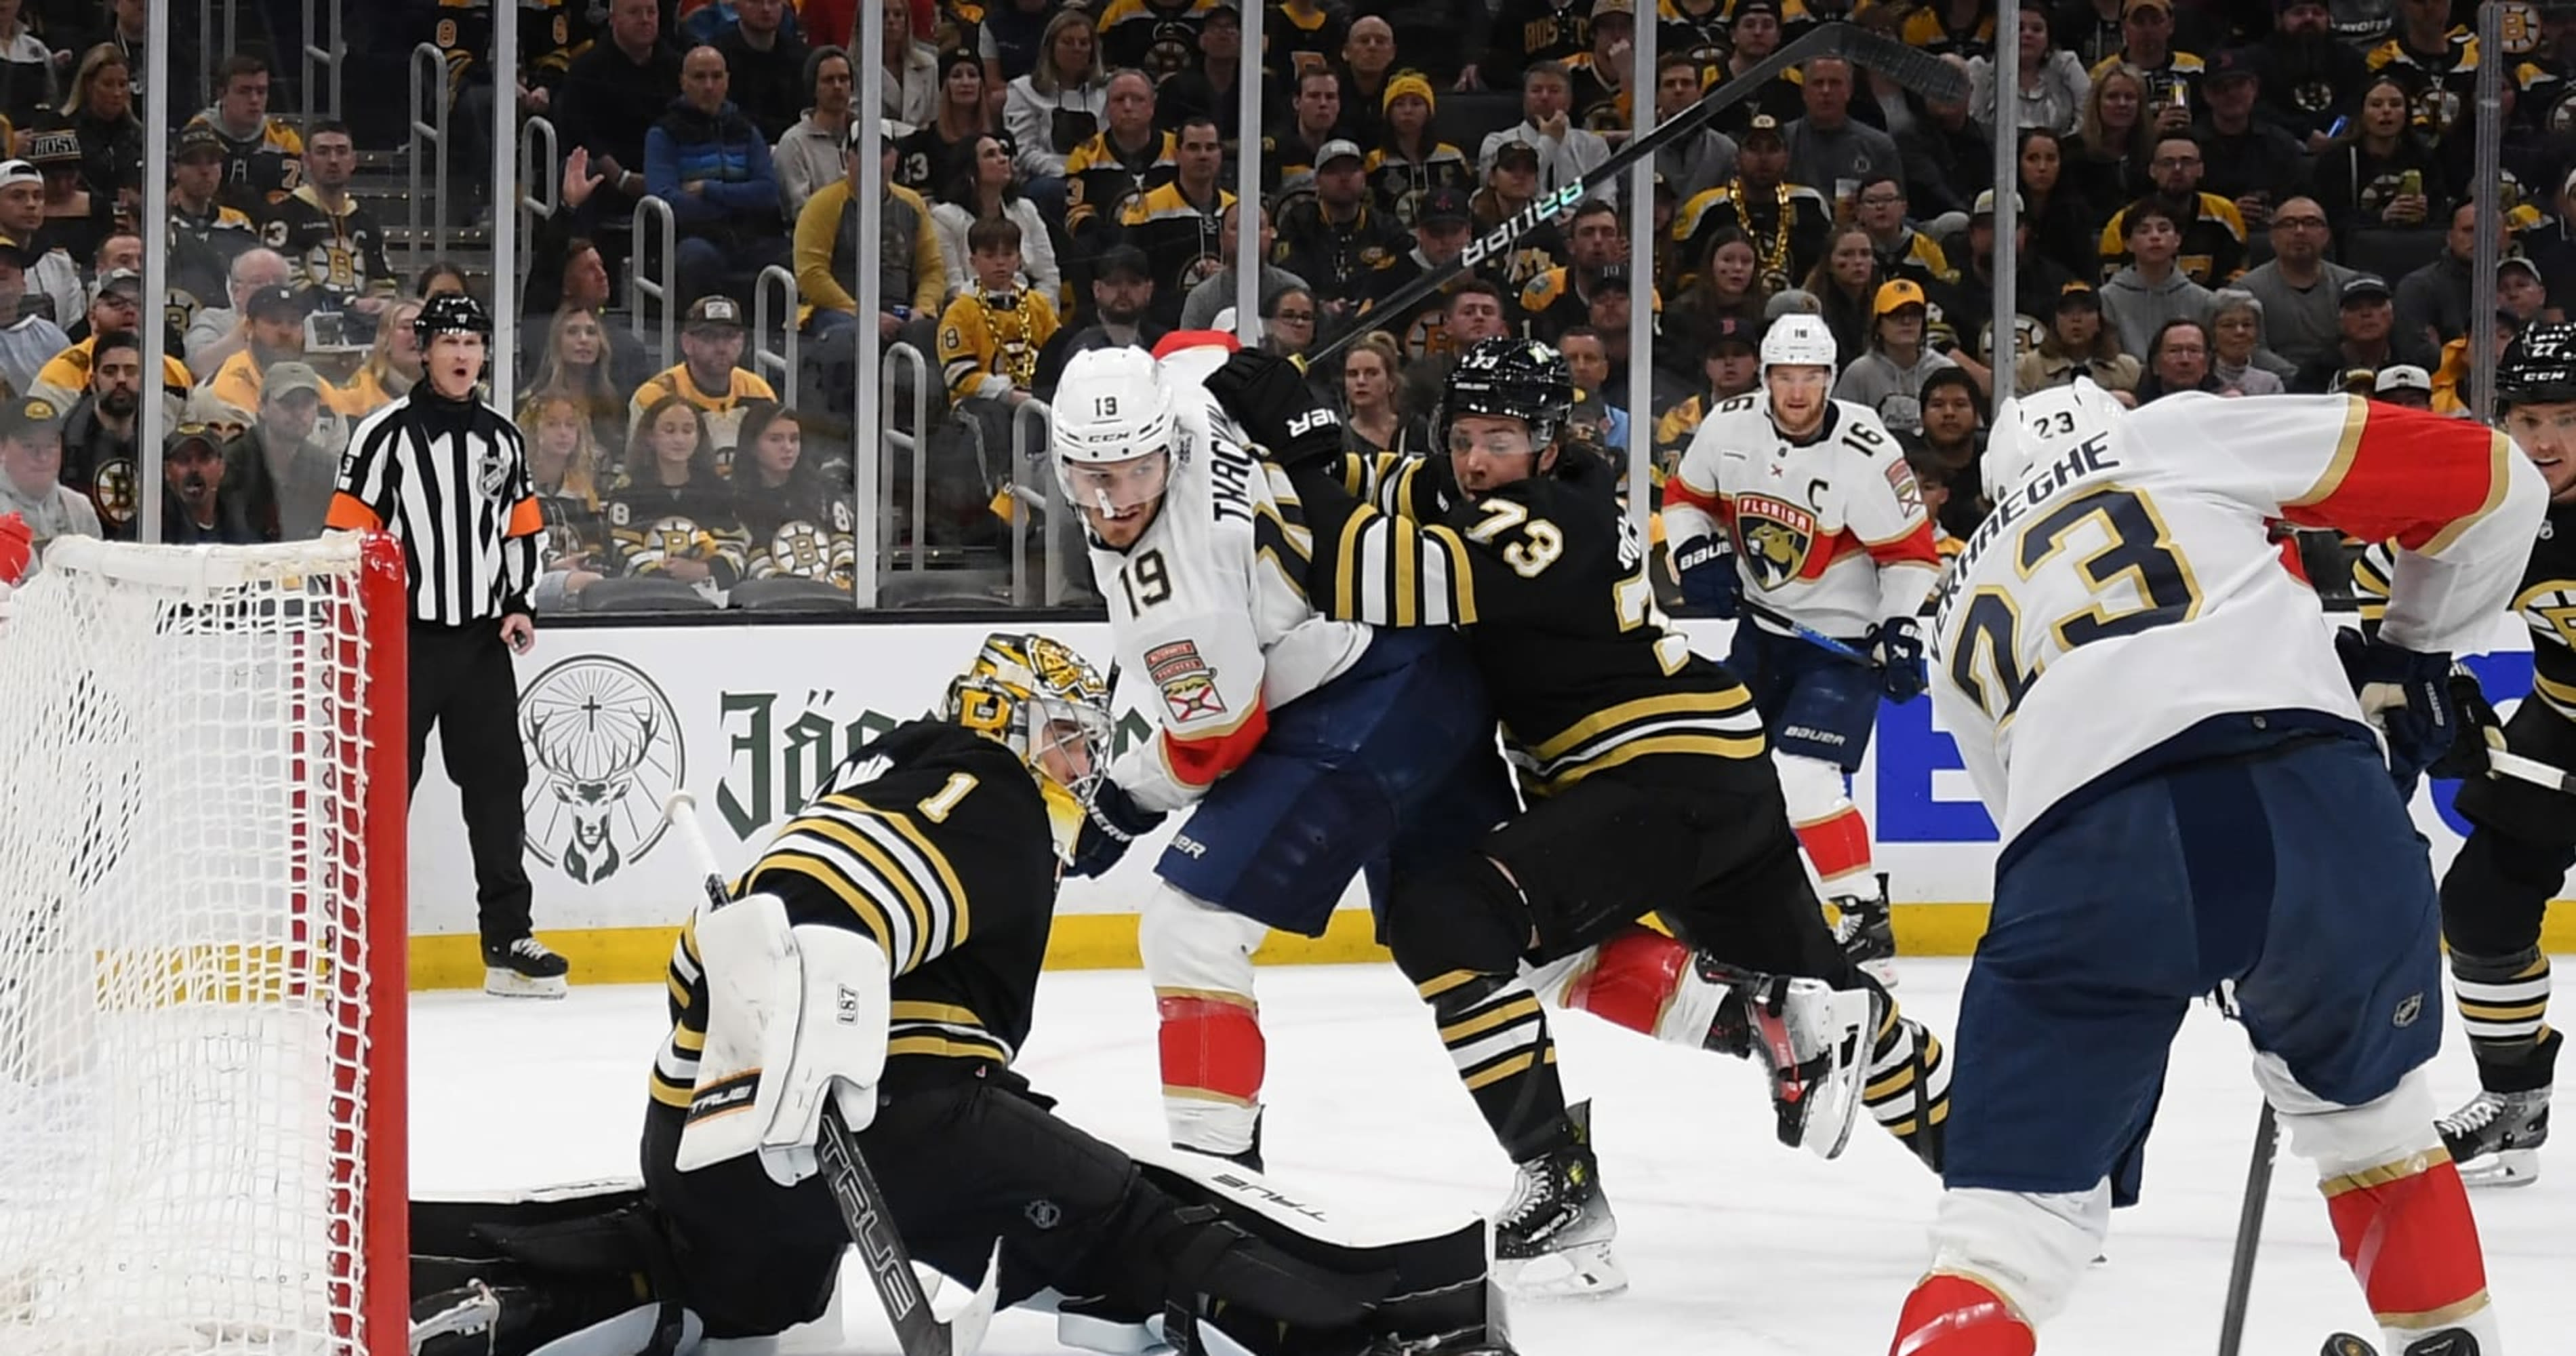 Bruins Ripped By NHL Fans for Lack of Effort as Panthers Take Series Lead with G3 Win